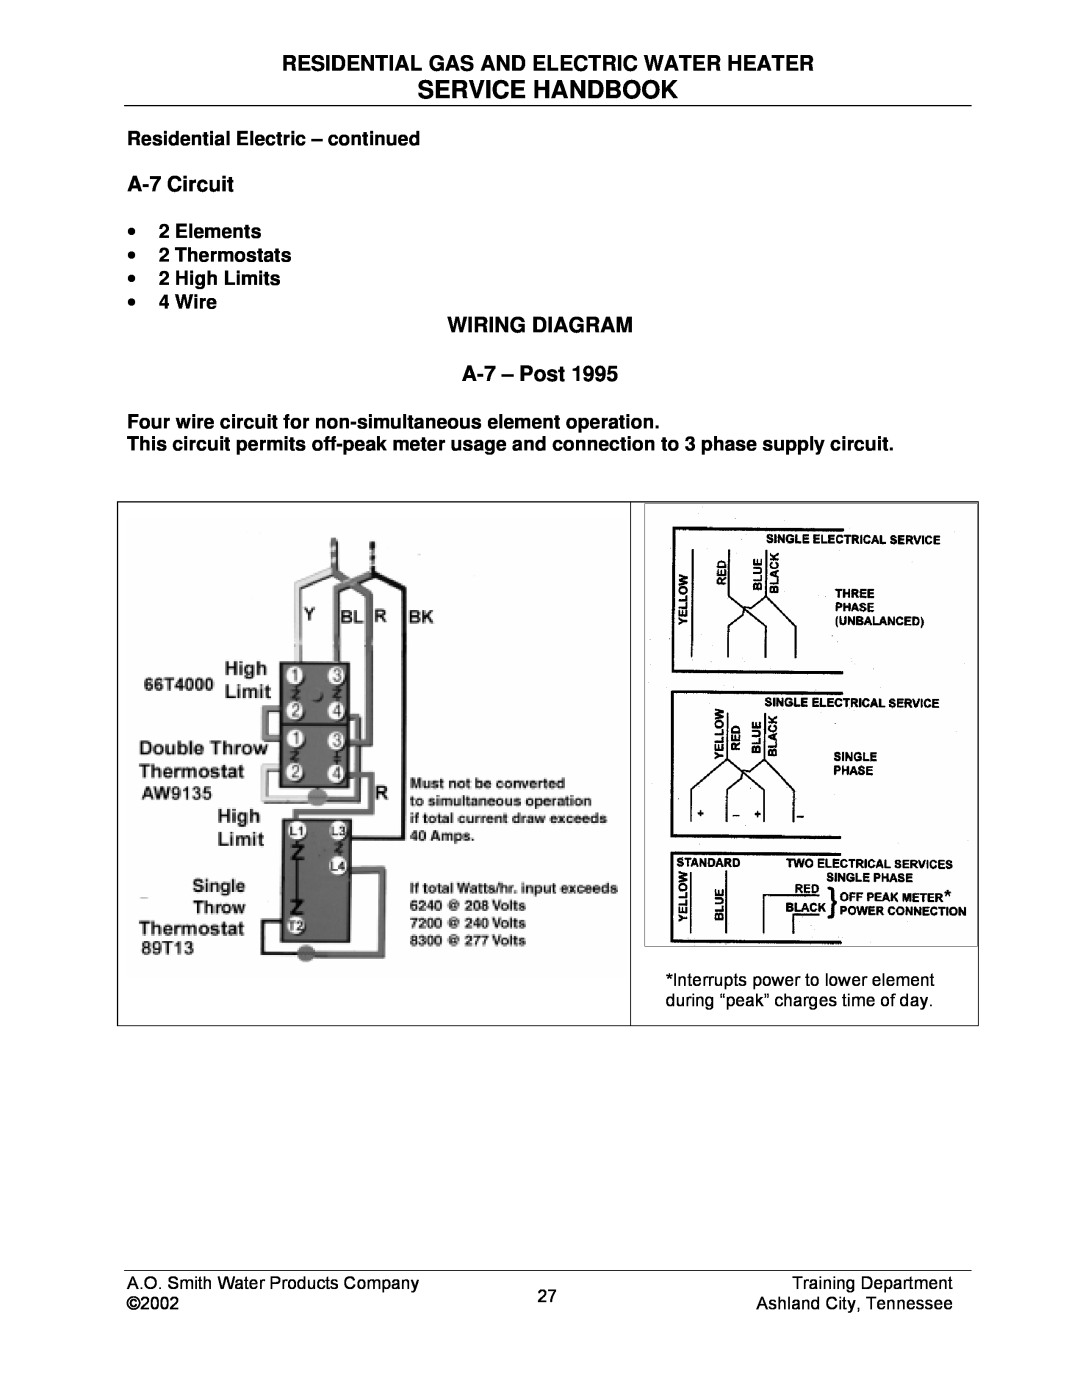 A.O. Smith TC-049-R2 Service Handbook, Residential Gas And Electric Water Heater, A-7 Circuit, WIRING DIAGRAM A-7 - Post 